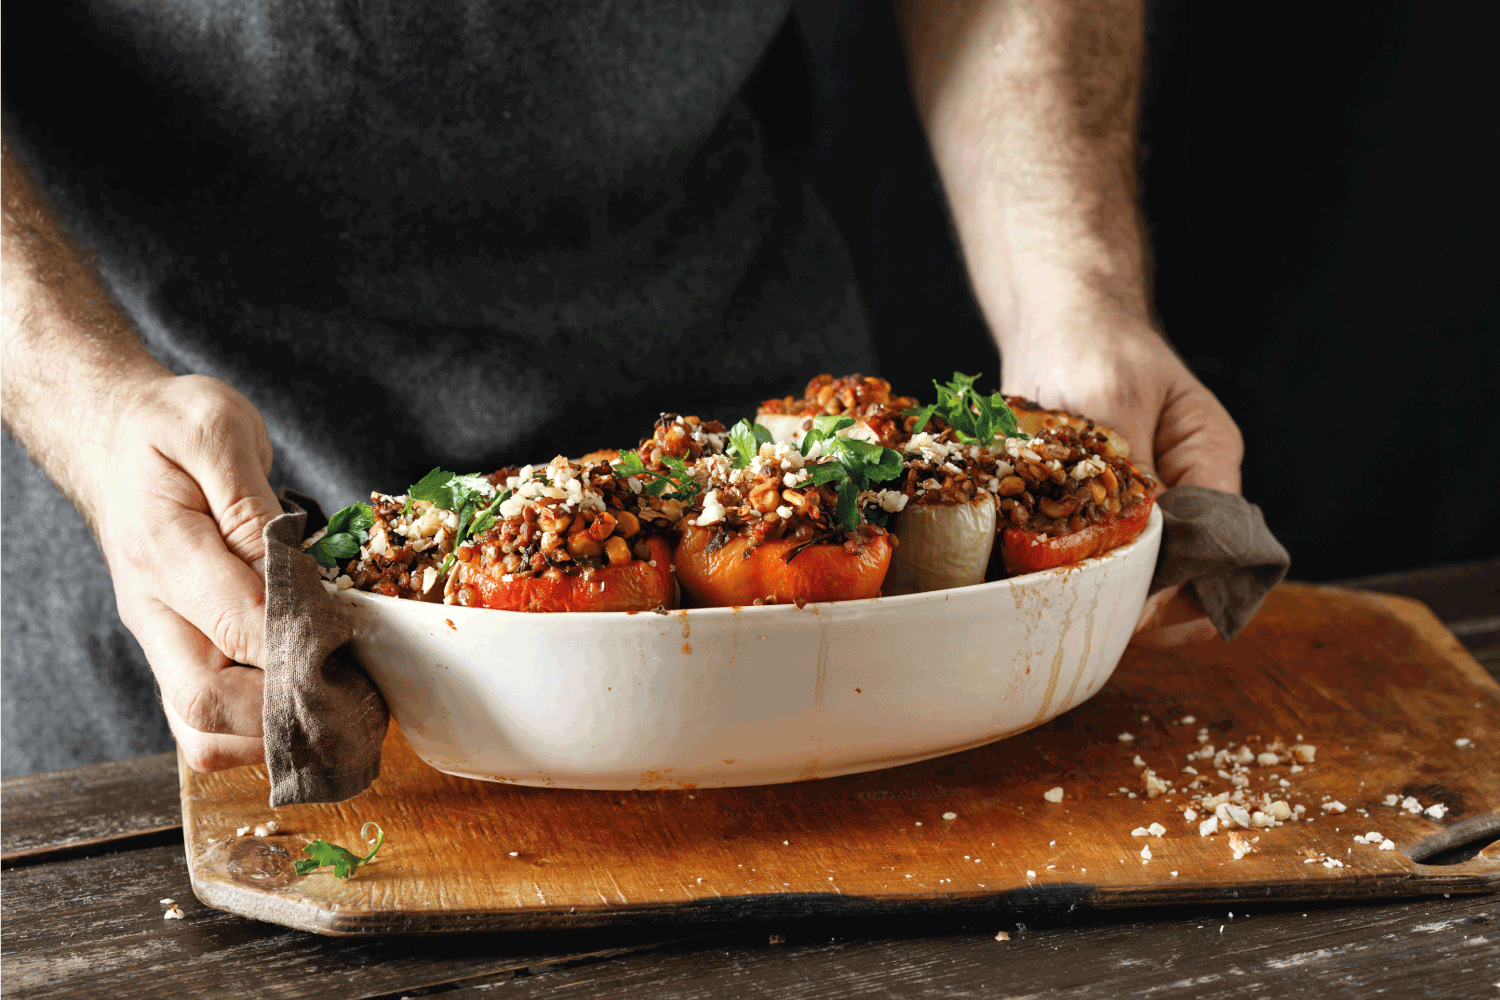 Male hands holding cooked stuffed peppers with green lentils, corn, salsa and almonds in baking dish on wooden table